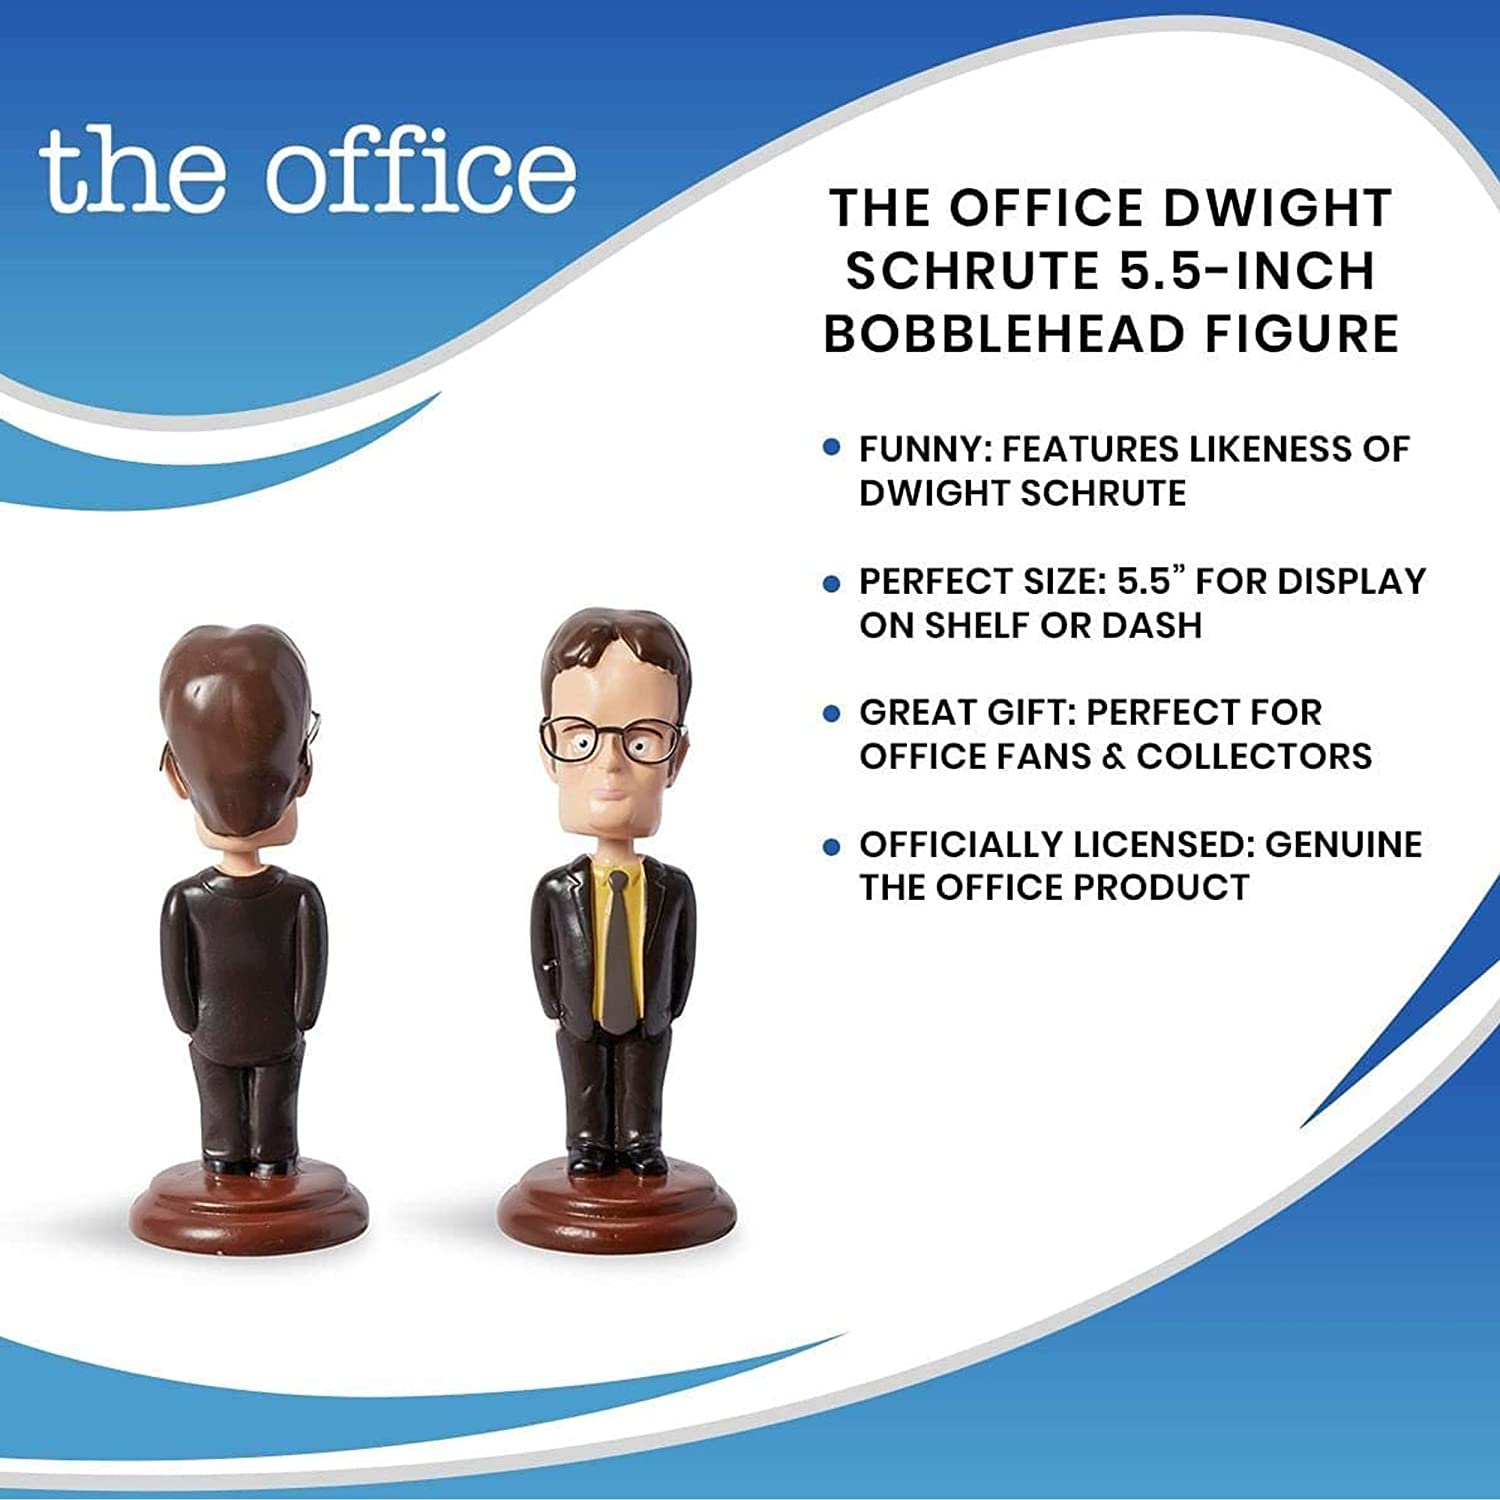 The Office Dwight Schrute Bobblehead - image 3 of 7